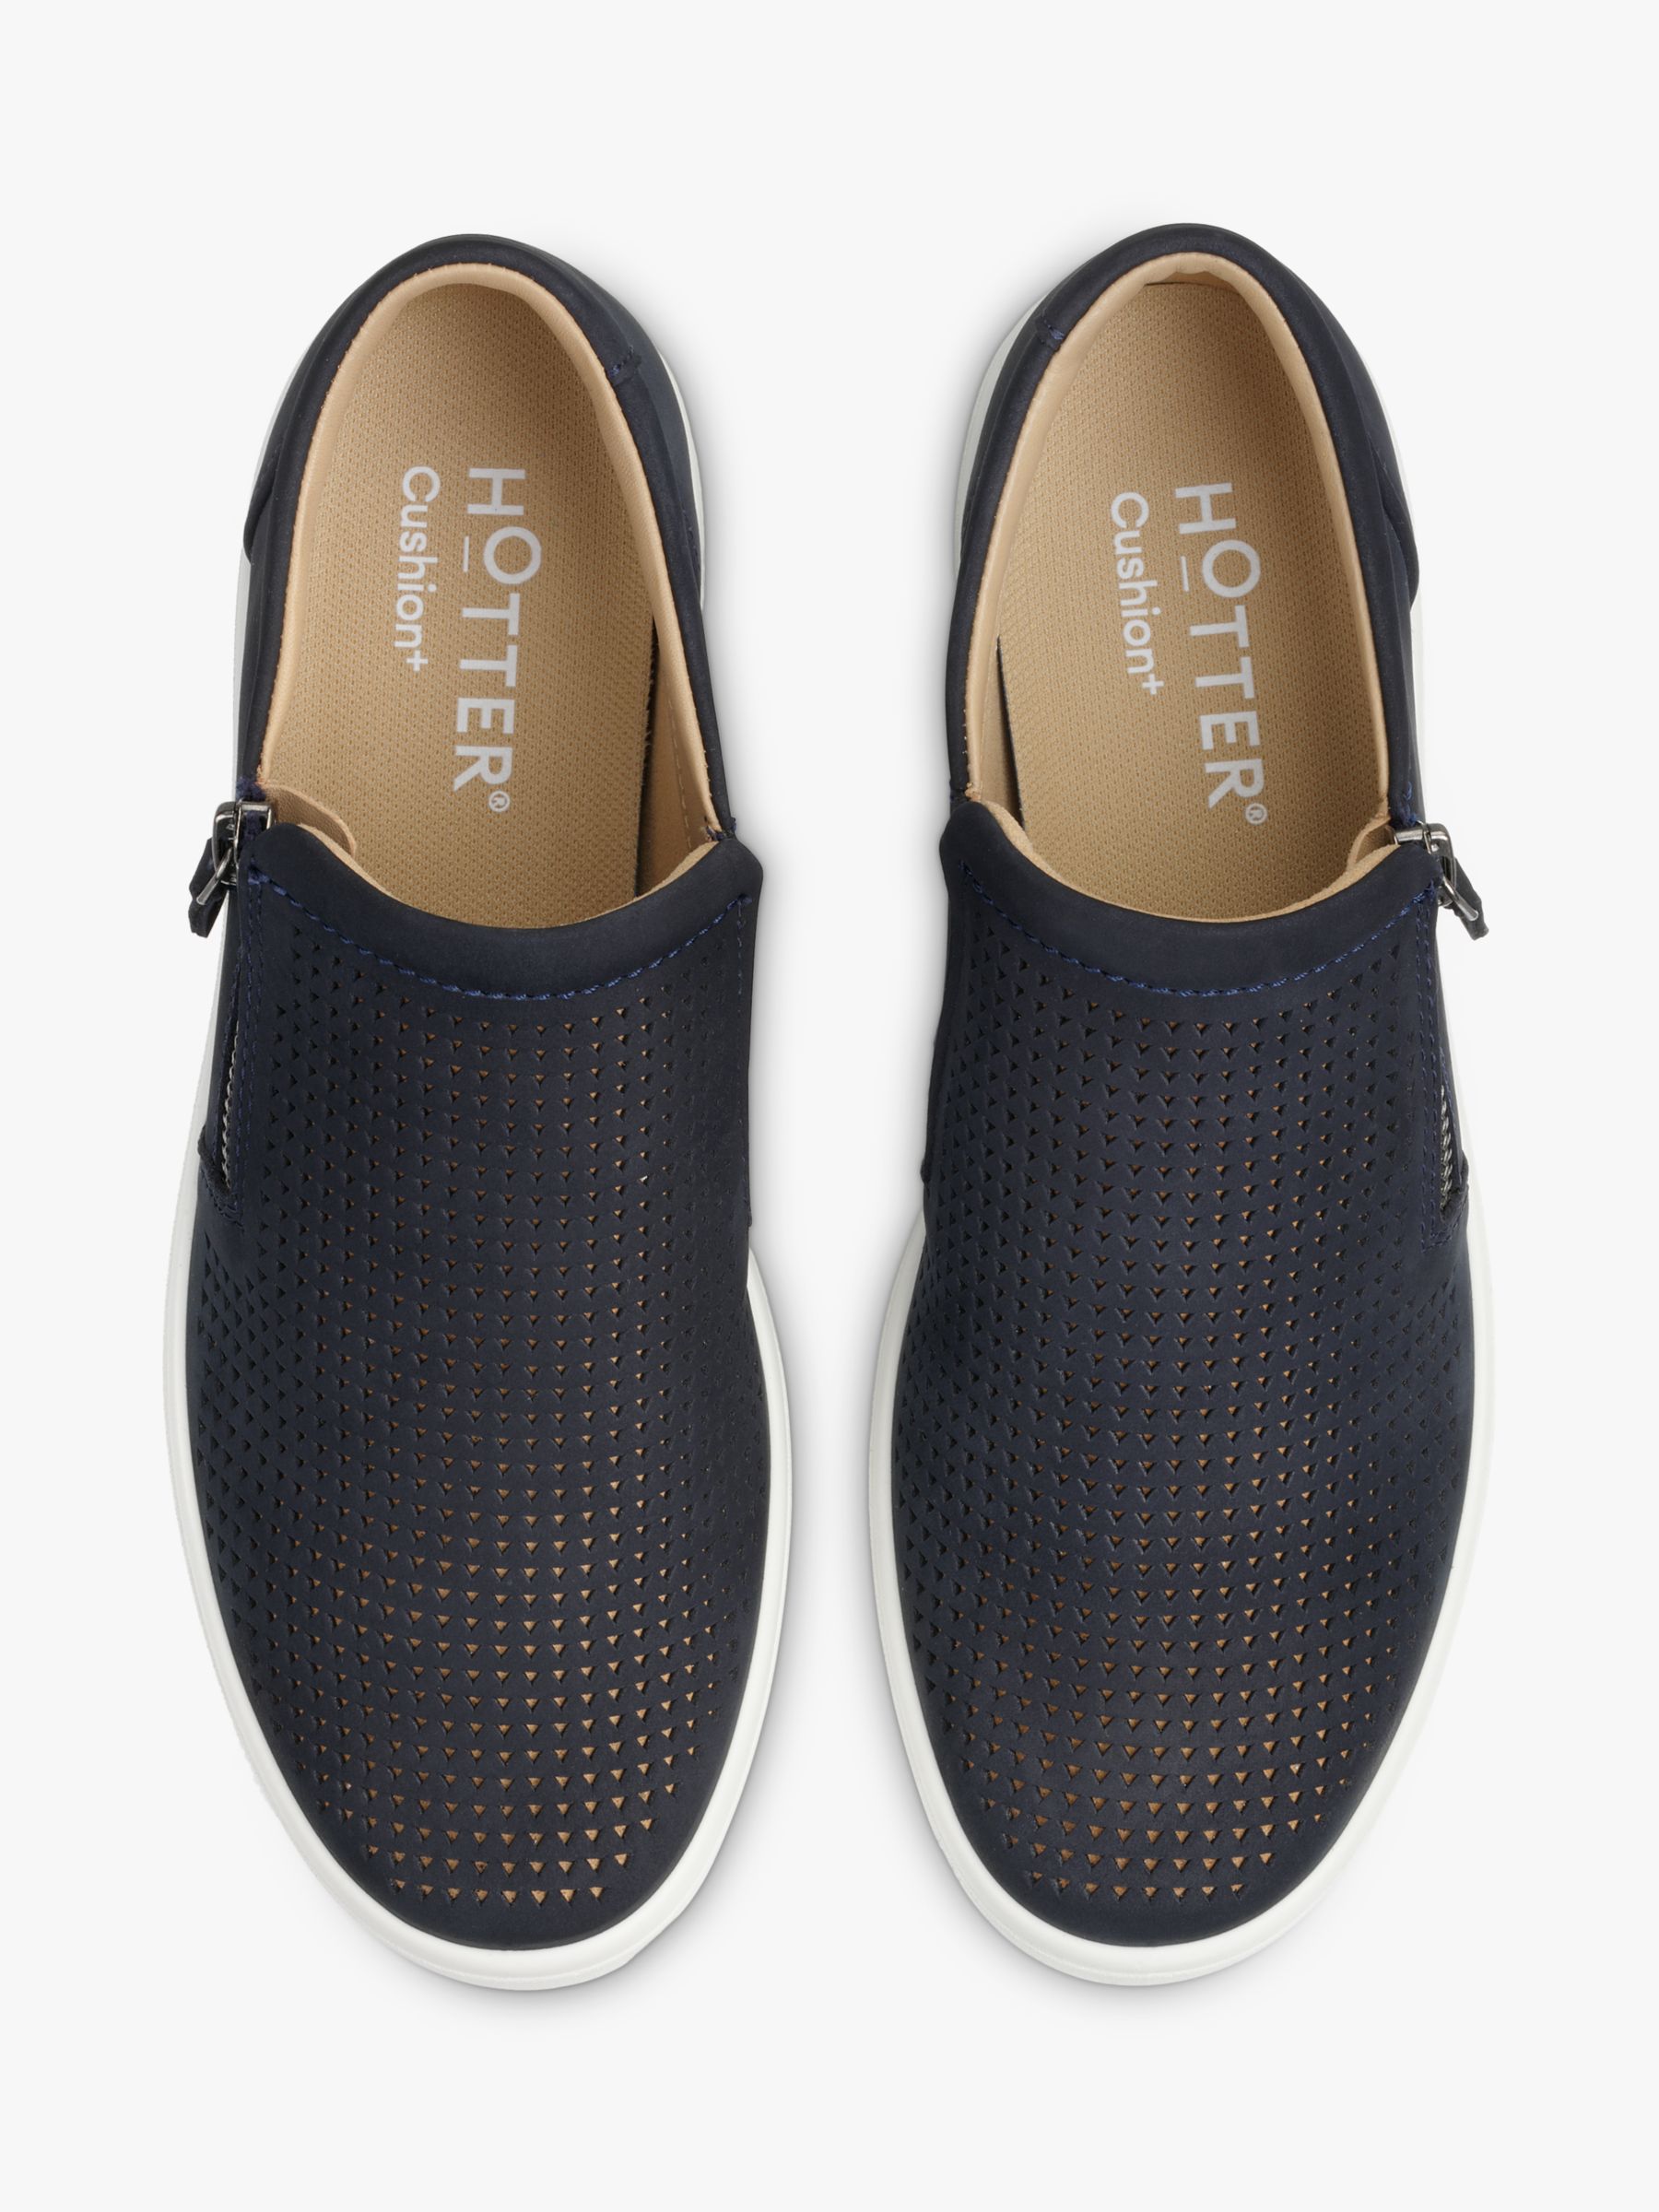 Buy Hotter Daisy Summer Deck Shoes Online at johnlewis.com